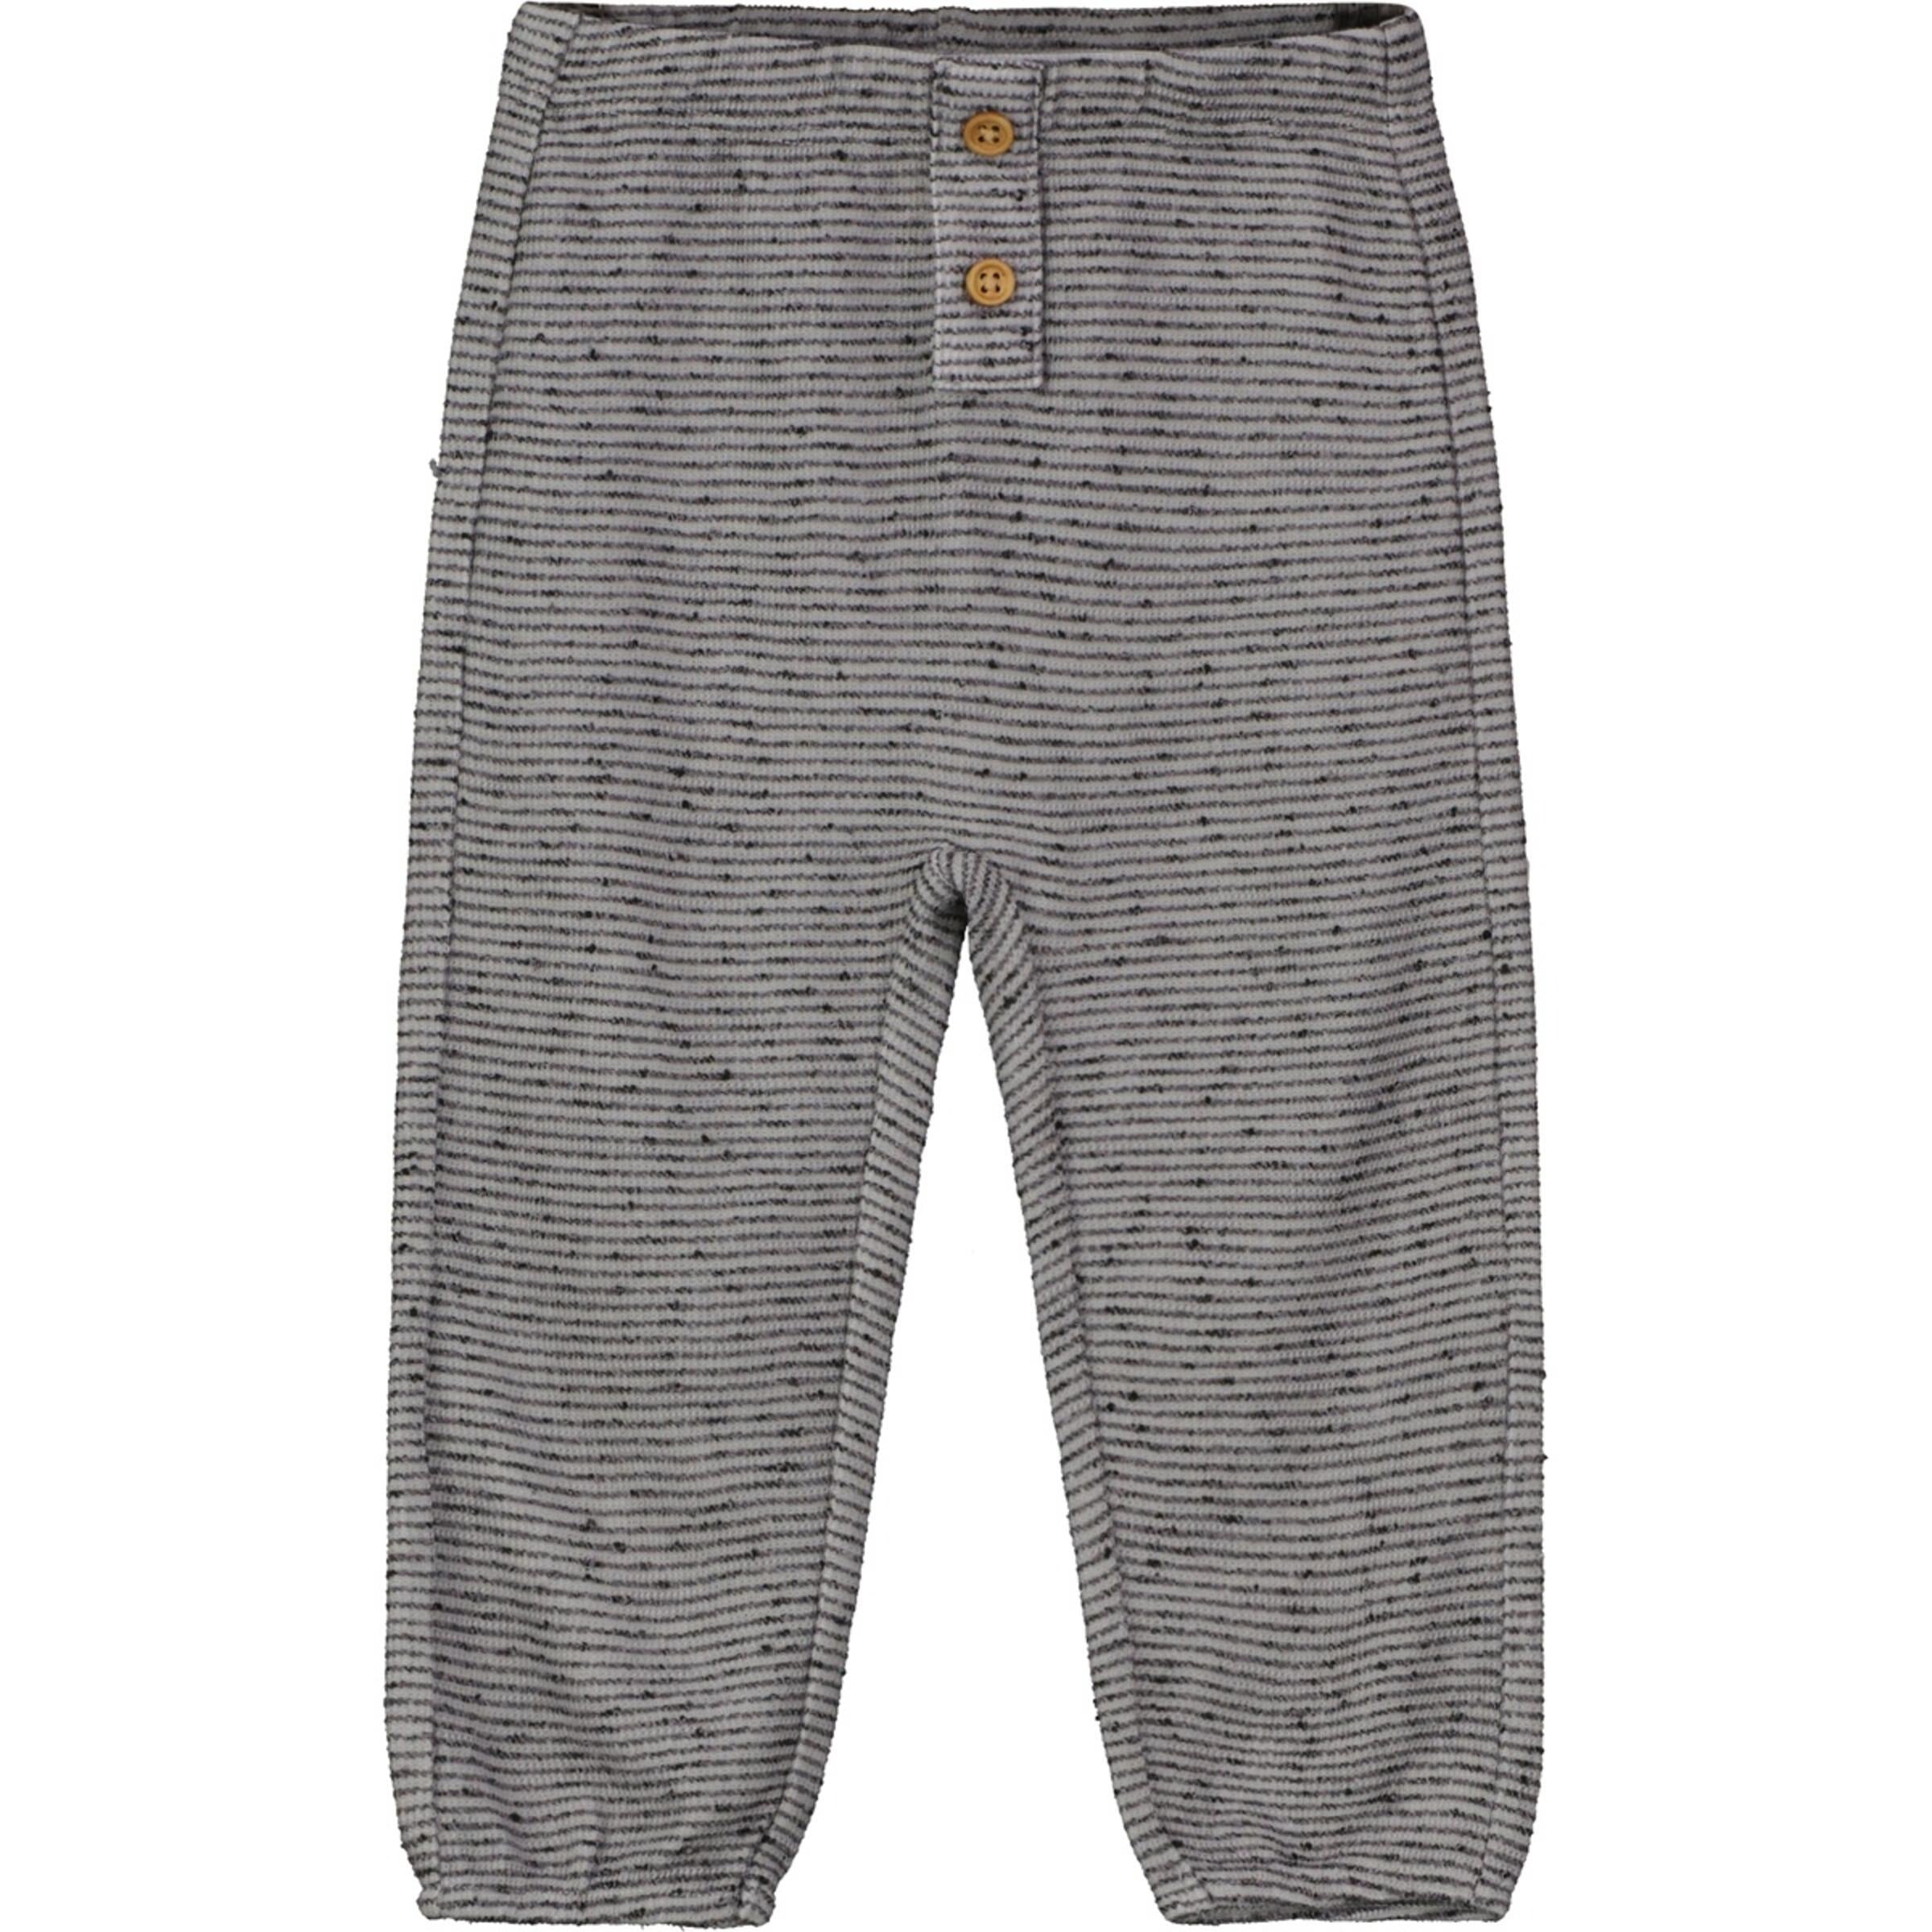 heathered gray jogger pants with two buttons